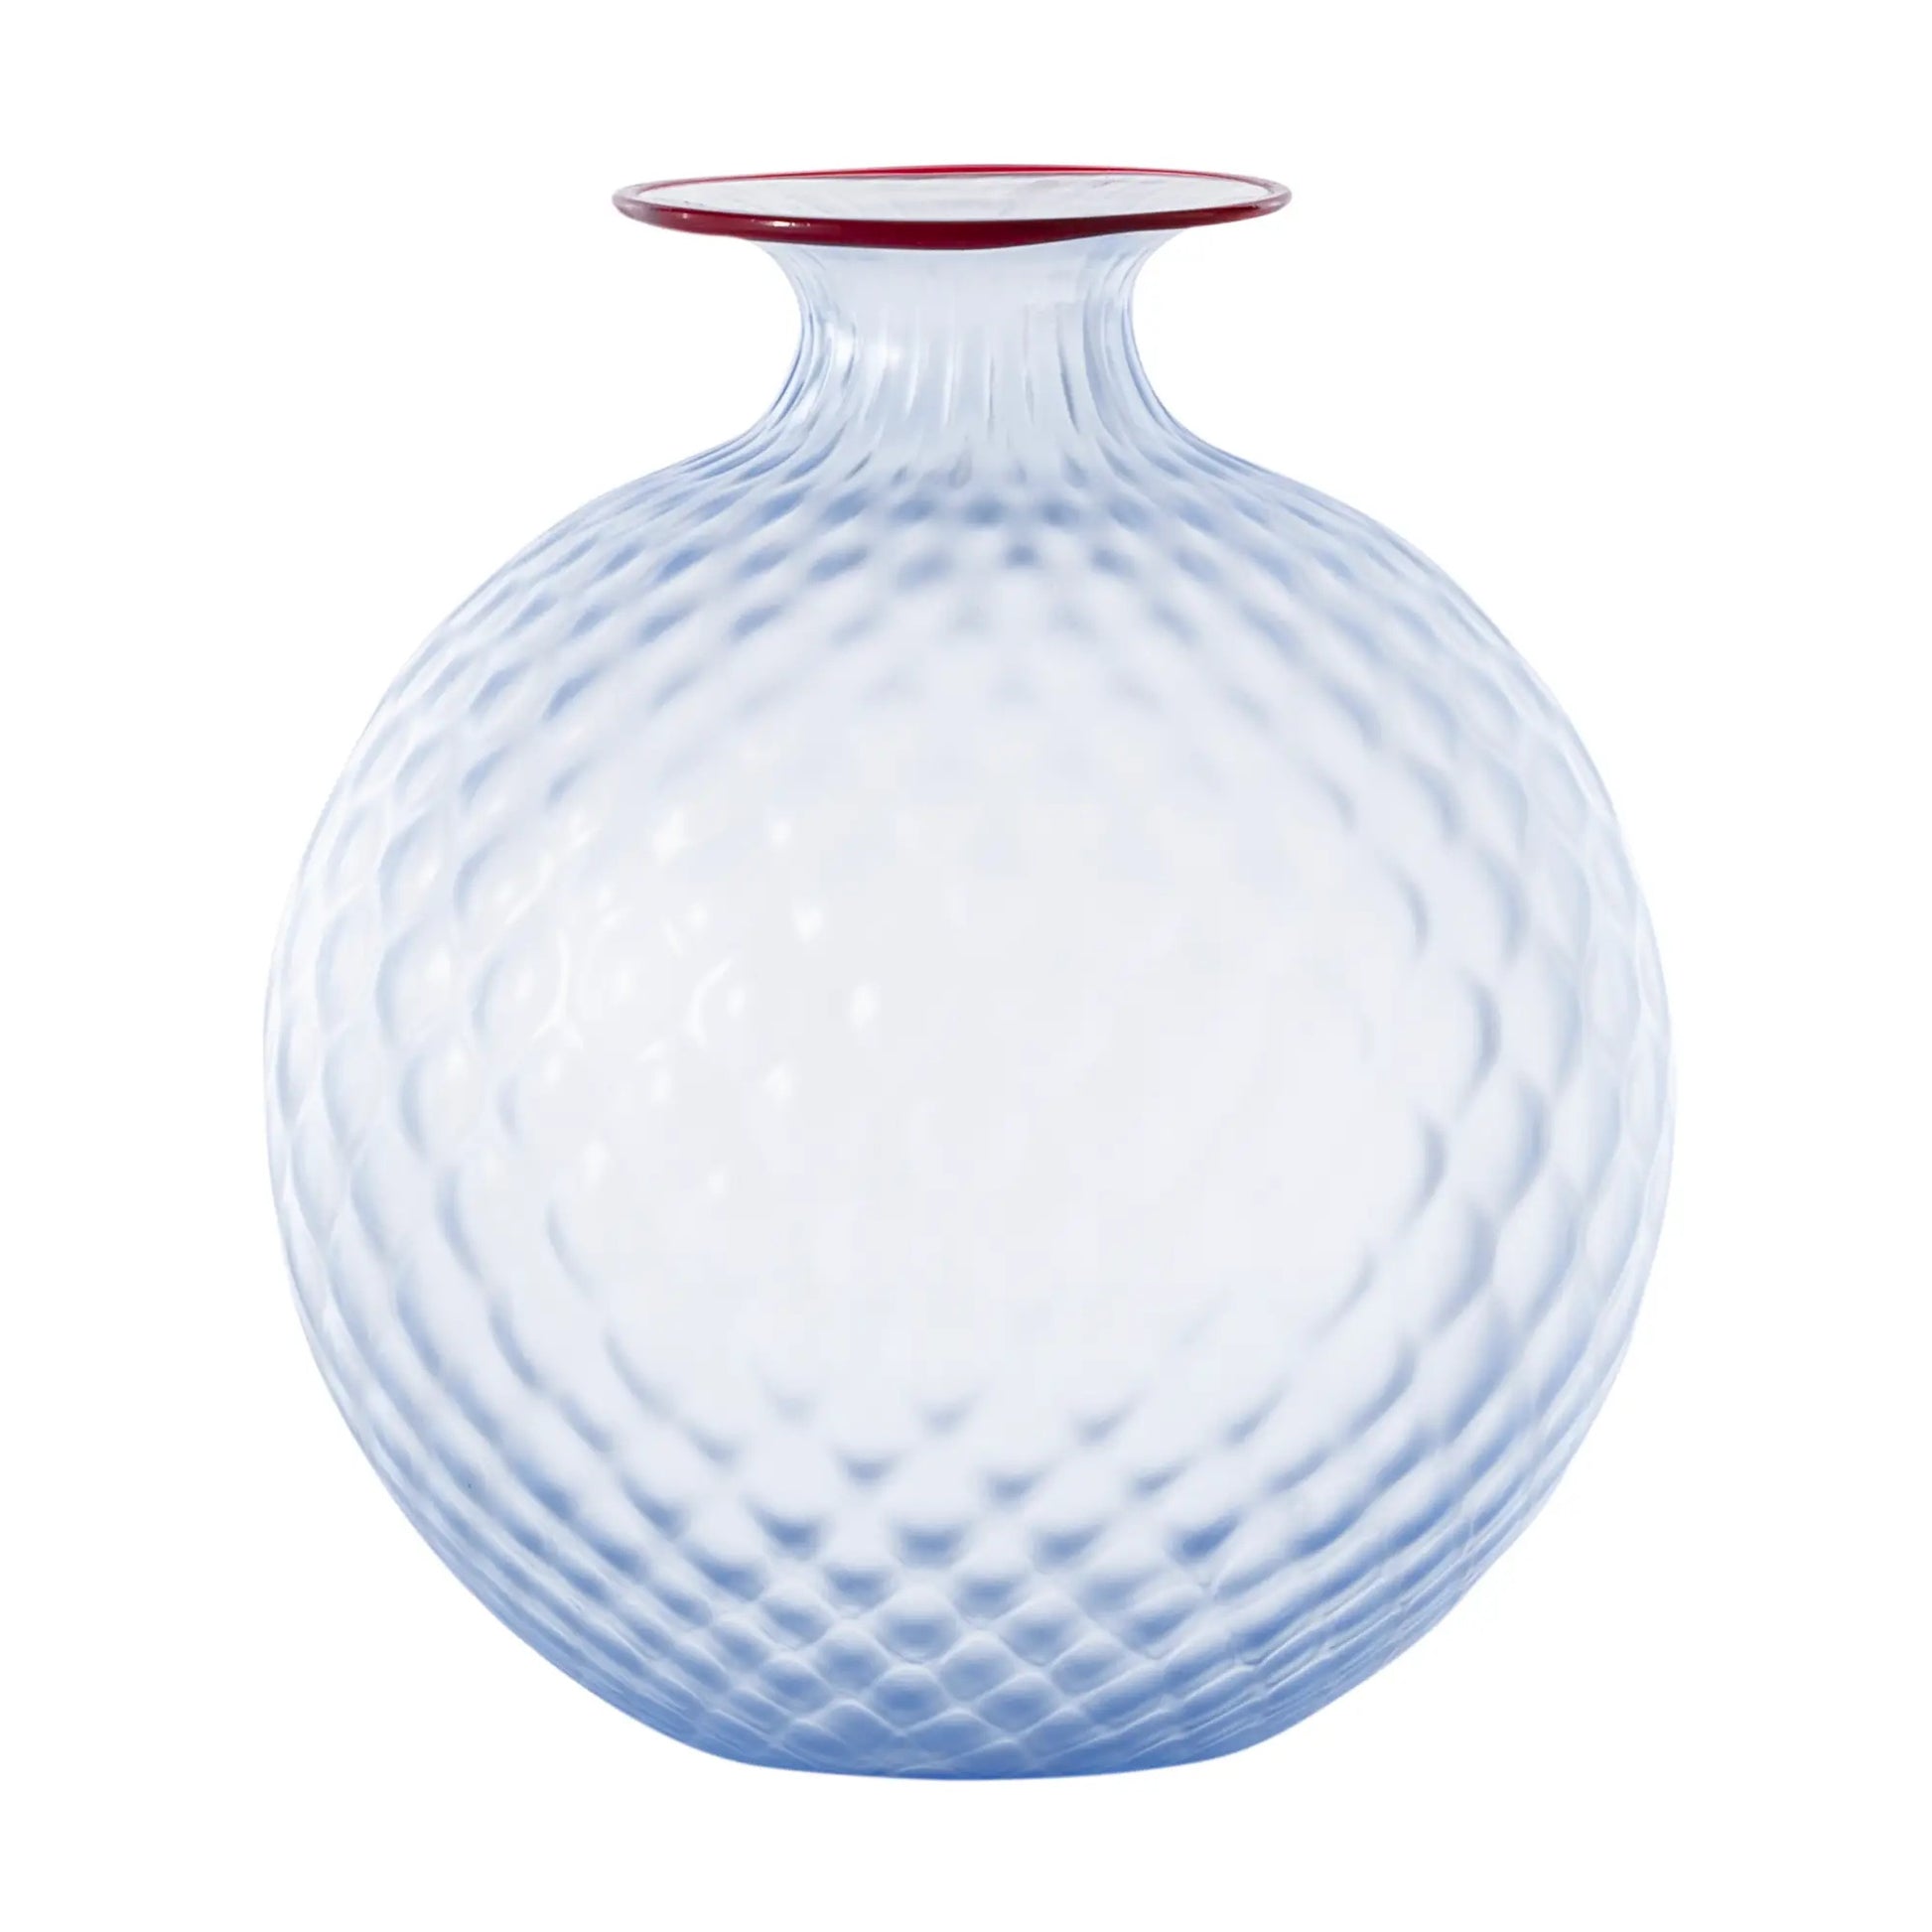 Monofiori Balloton Vase by Venini | ICEBERG Collection | Milk-White Color | Small blown glass vials with intricate caps resembling ancient treasures | Sandblasted details | Home Decor Vases | 2Jour Concierge